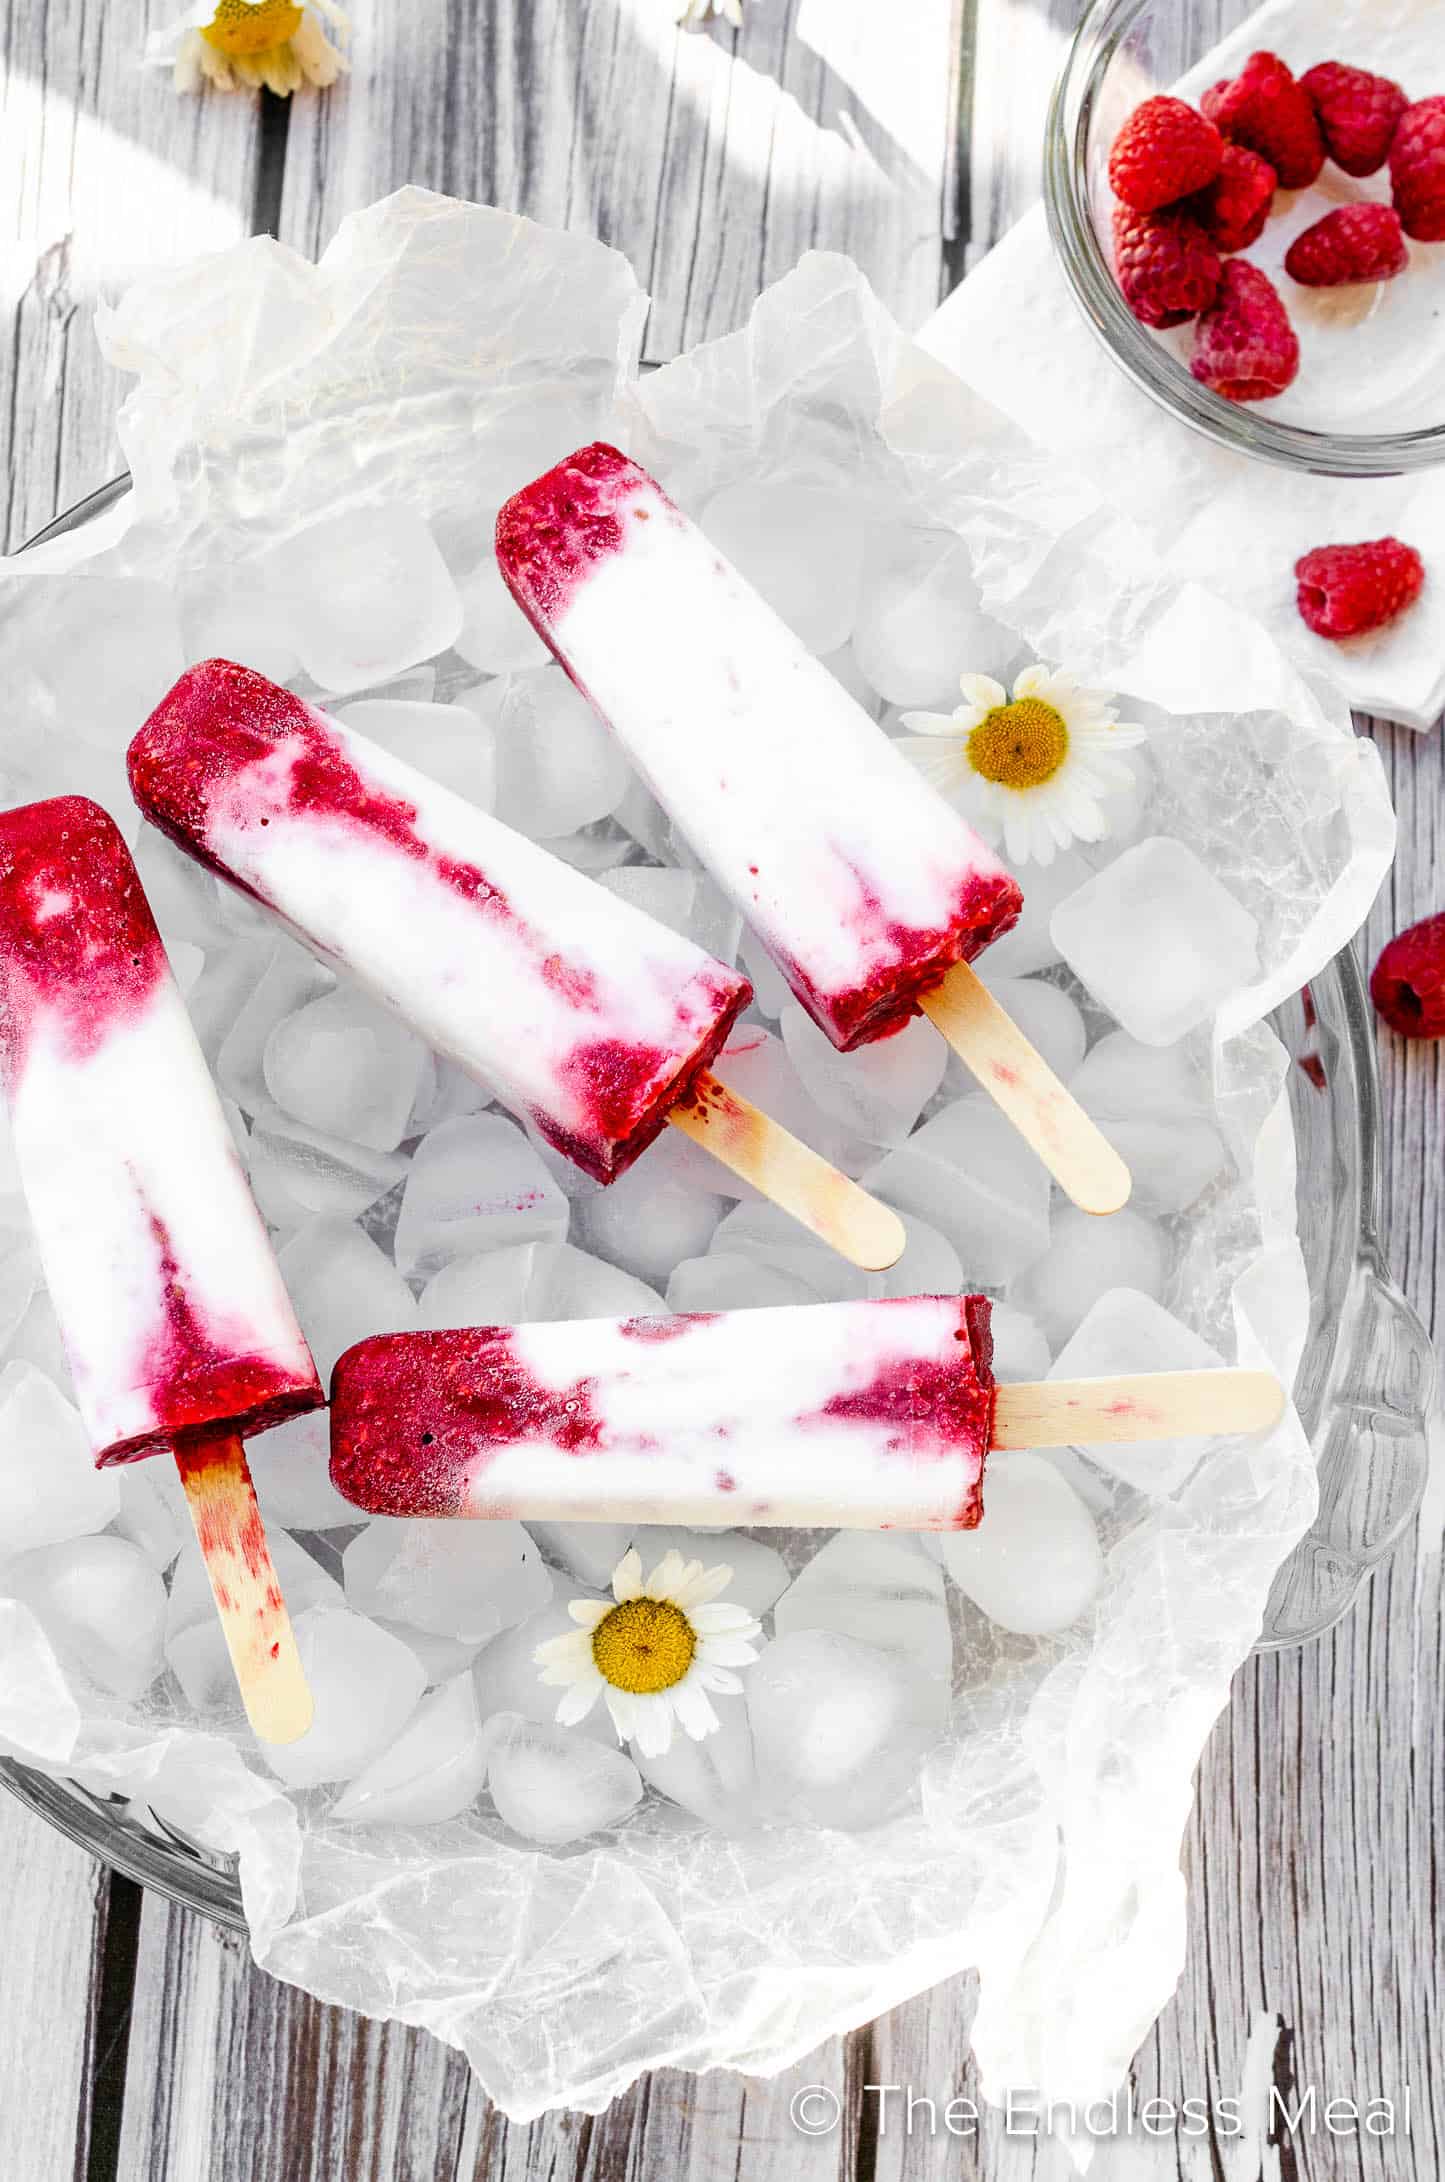 Coconut Raspberry Popsicles on a tray of ice